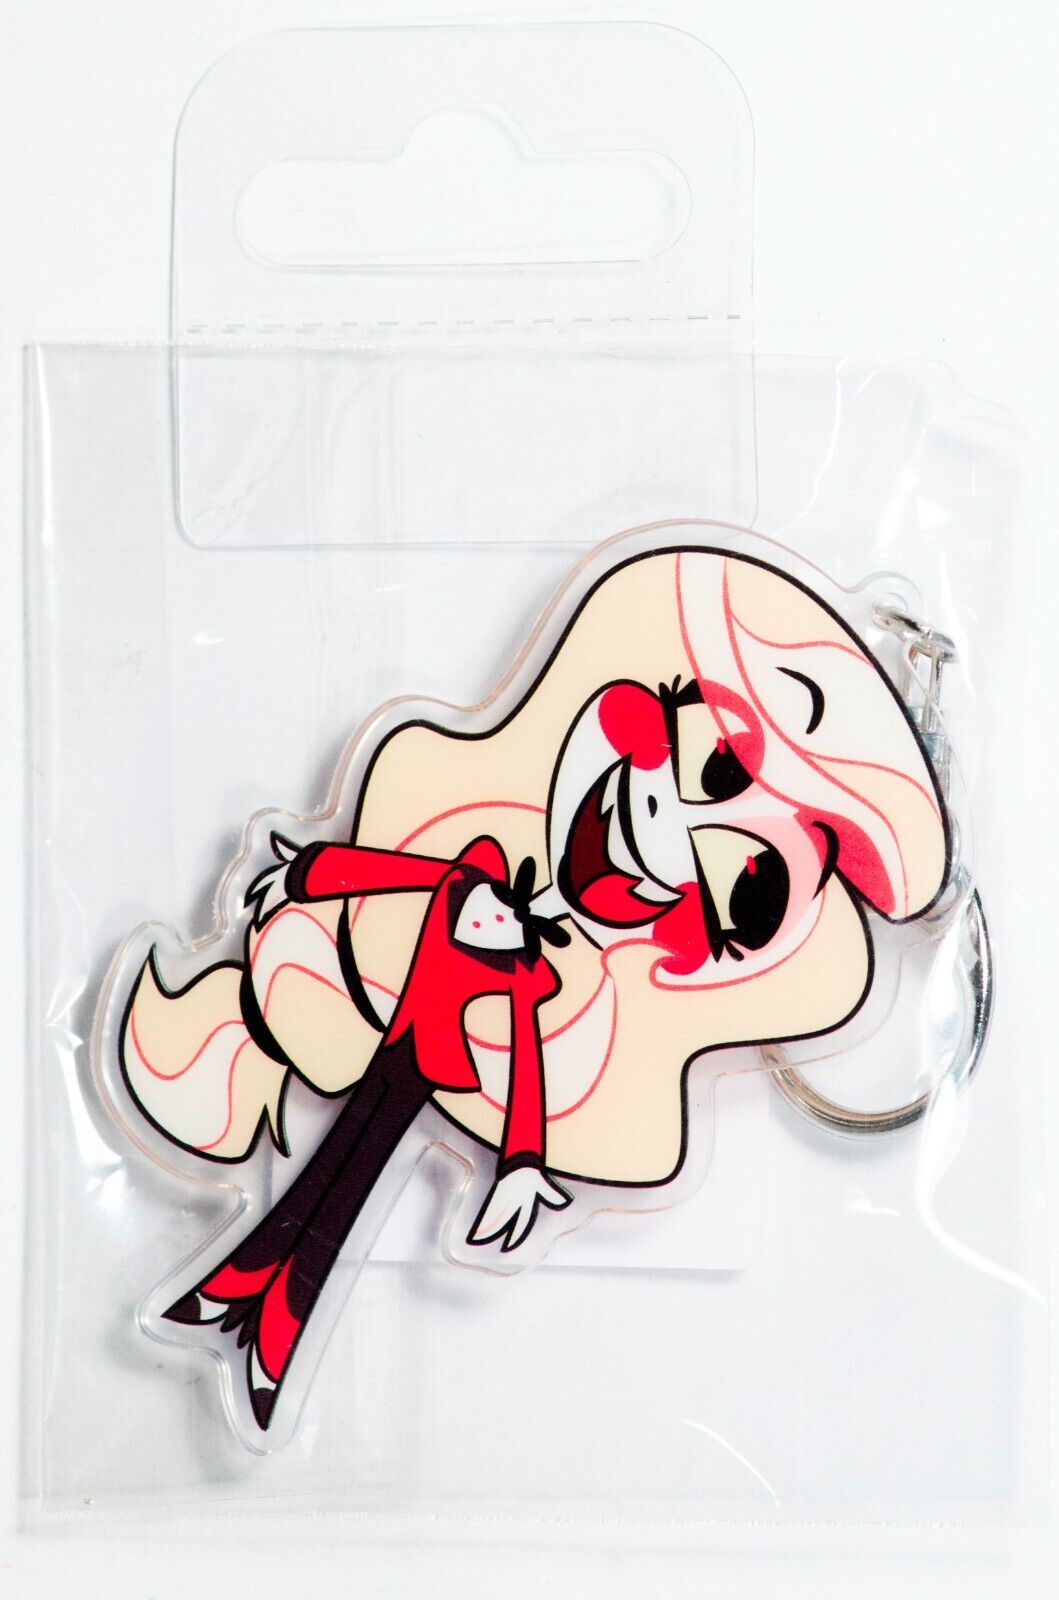 Hazbin Hotel Official CHARLIE Acrylic Keychain - RARE - SOLD OUT & DISCONTINUED